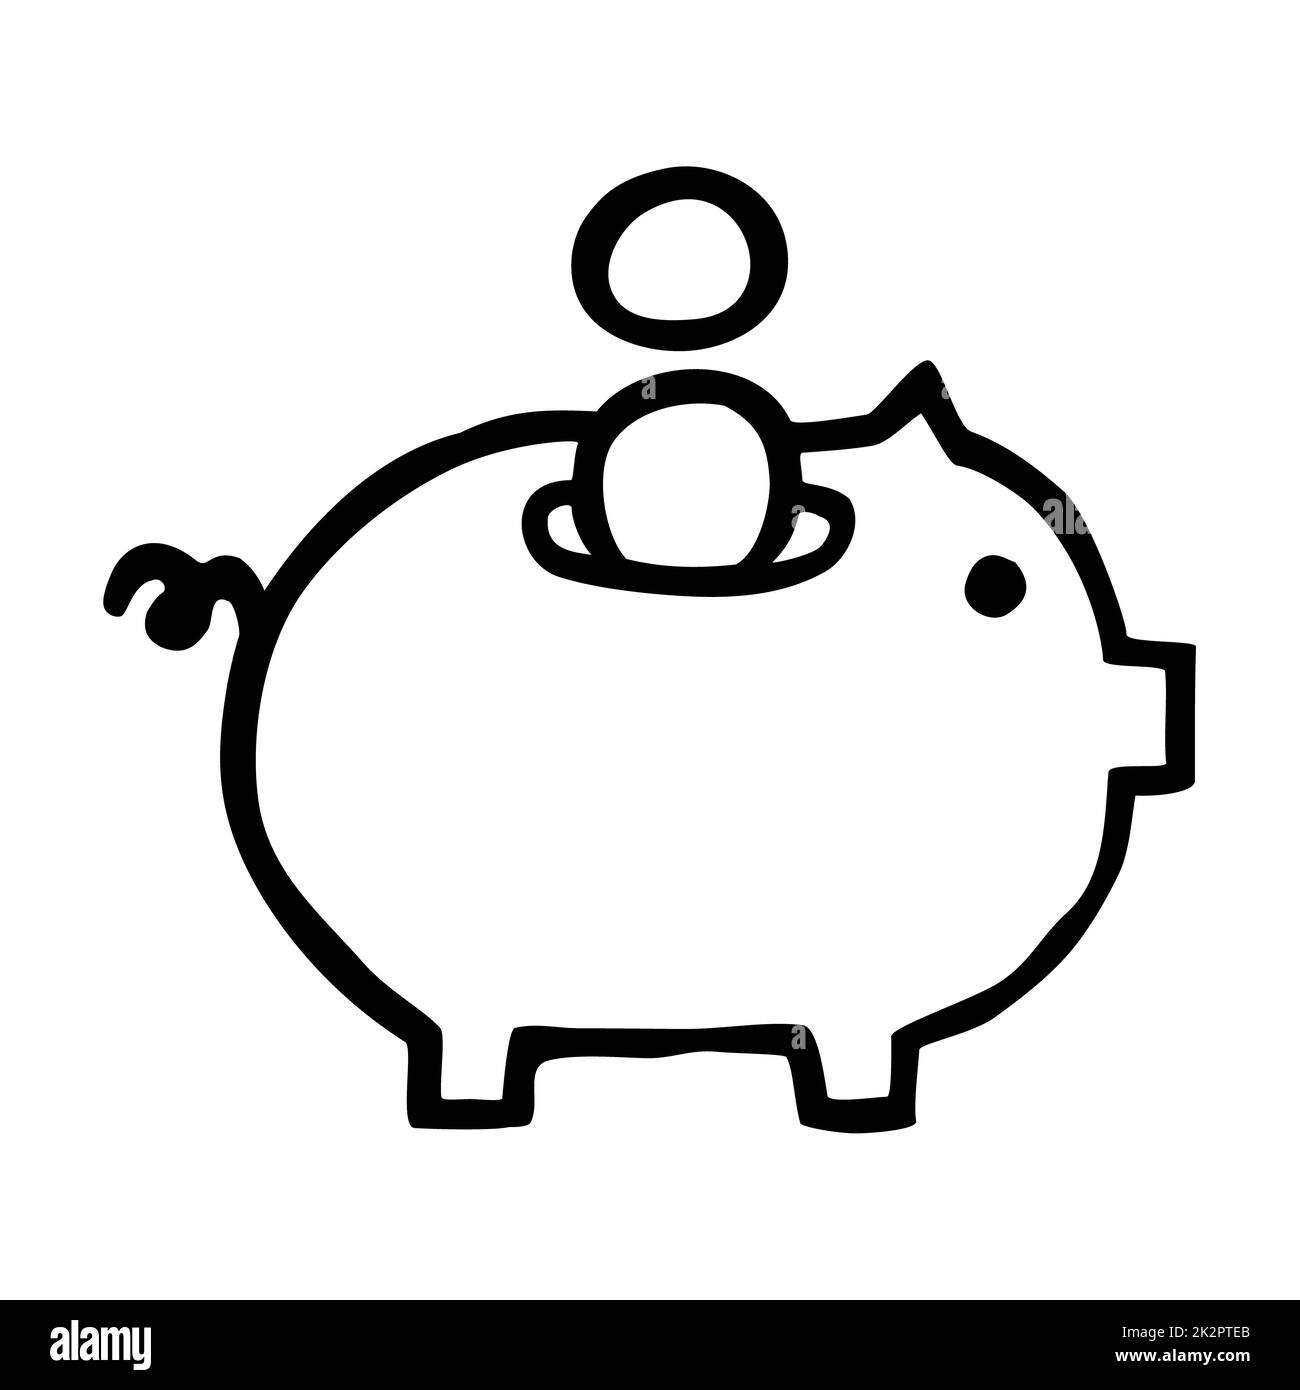 Doodle piggy bank icon or logo, hand drawn with thin black line. Stock Photo